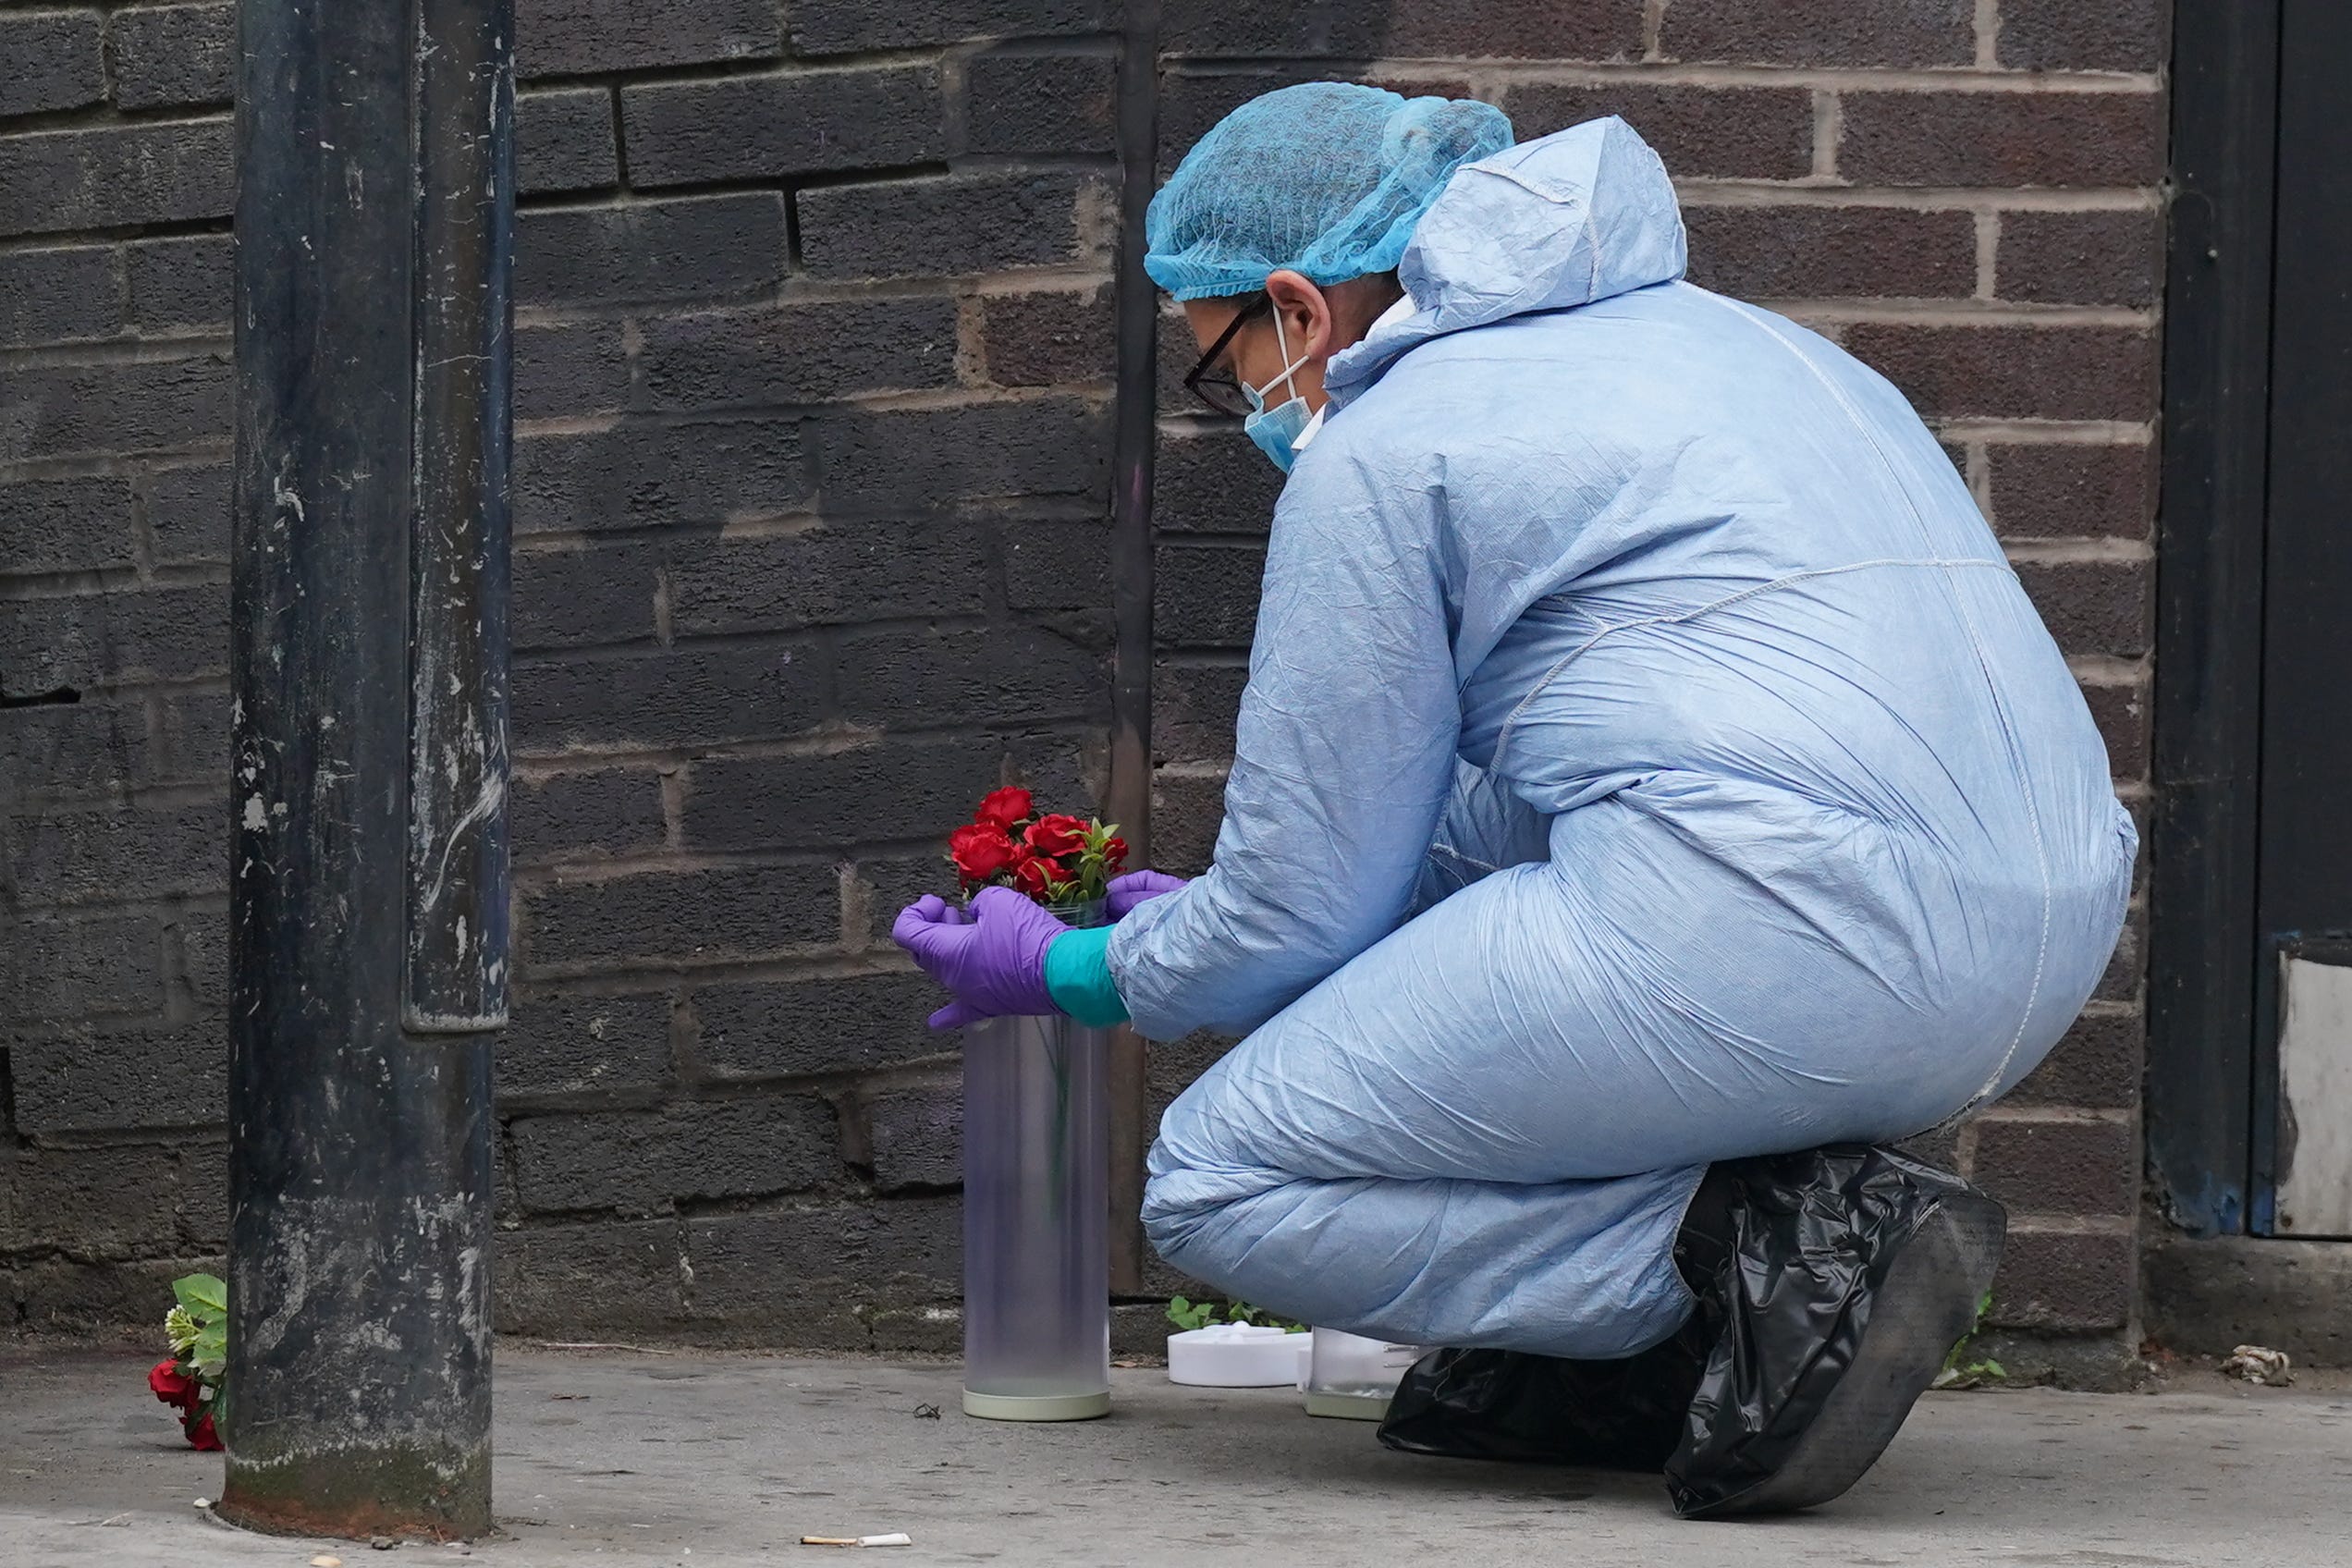 A forensic investigator puts flowers into a container at the scene near the Whitgift shopping centre